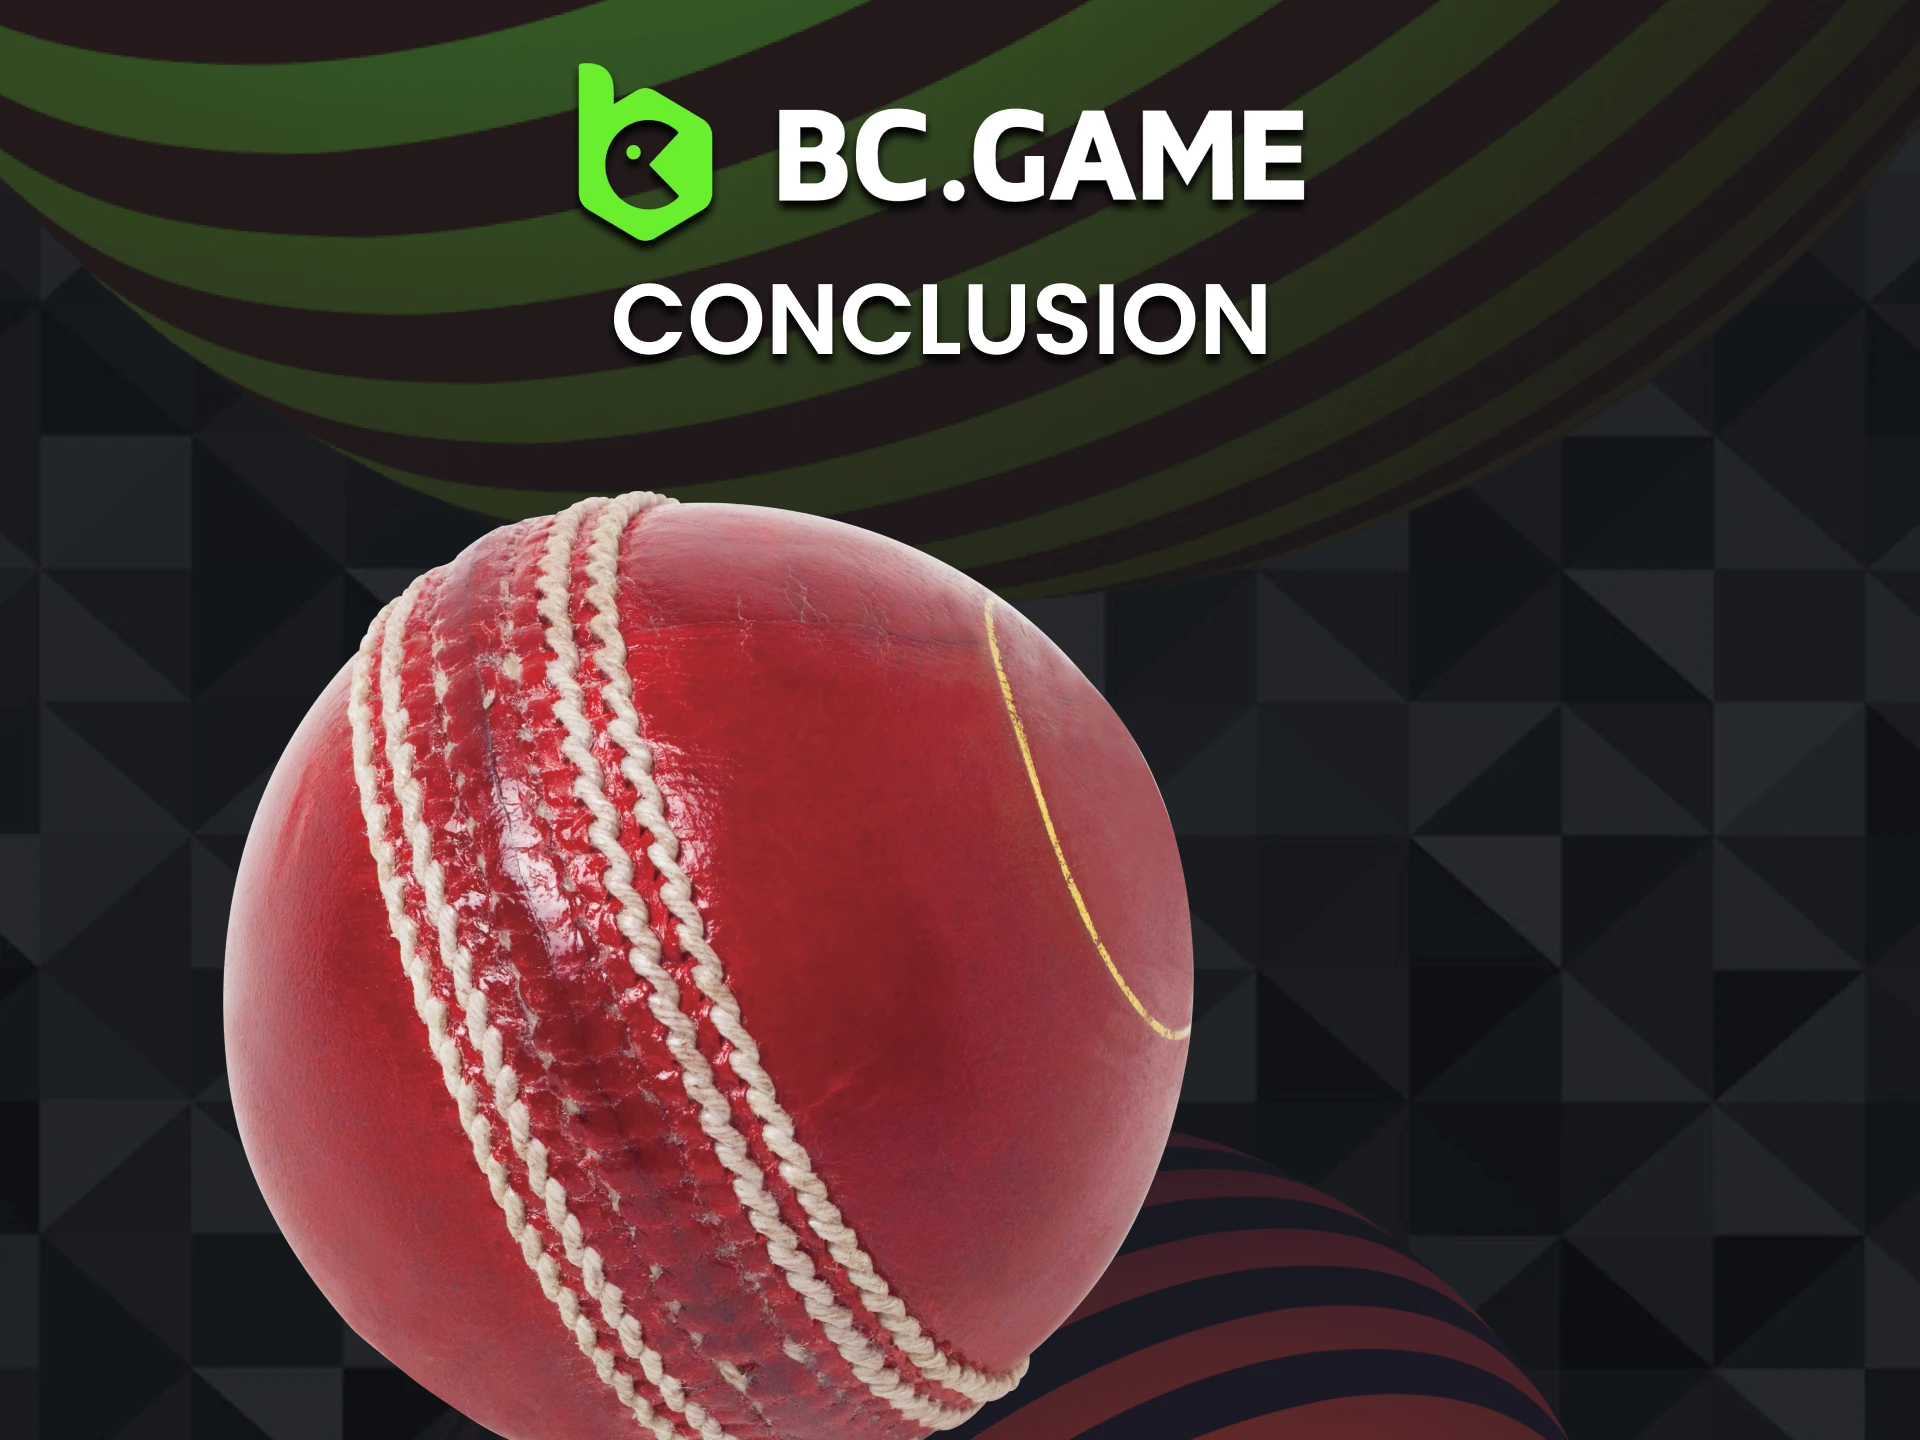 BC Game is the right choice for cricket betting.